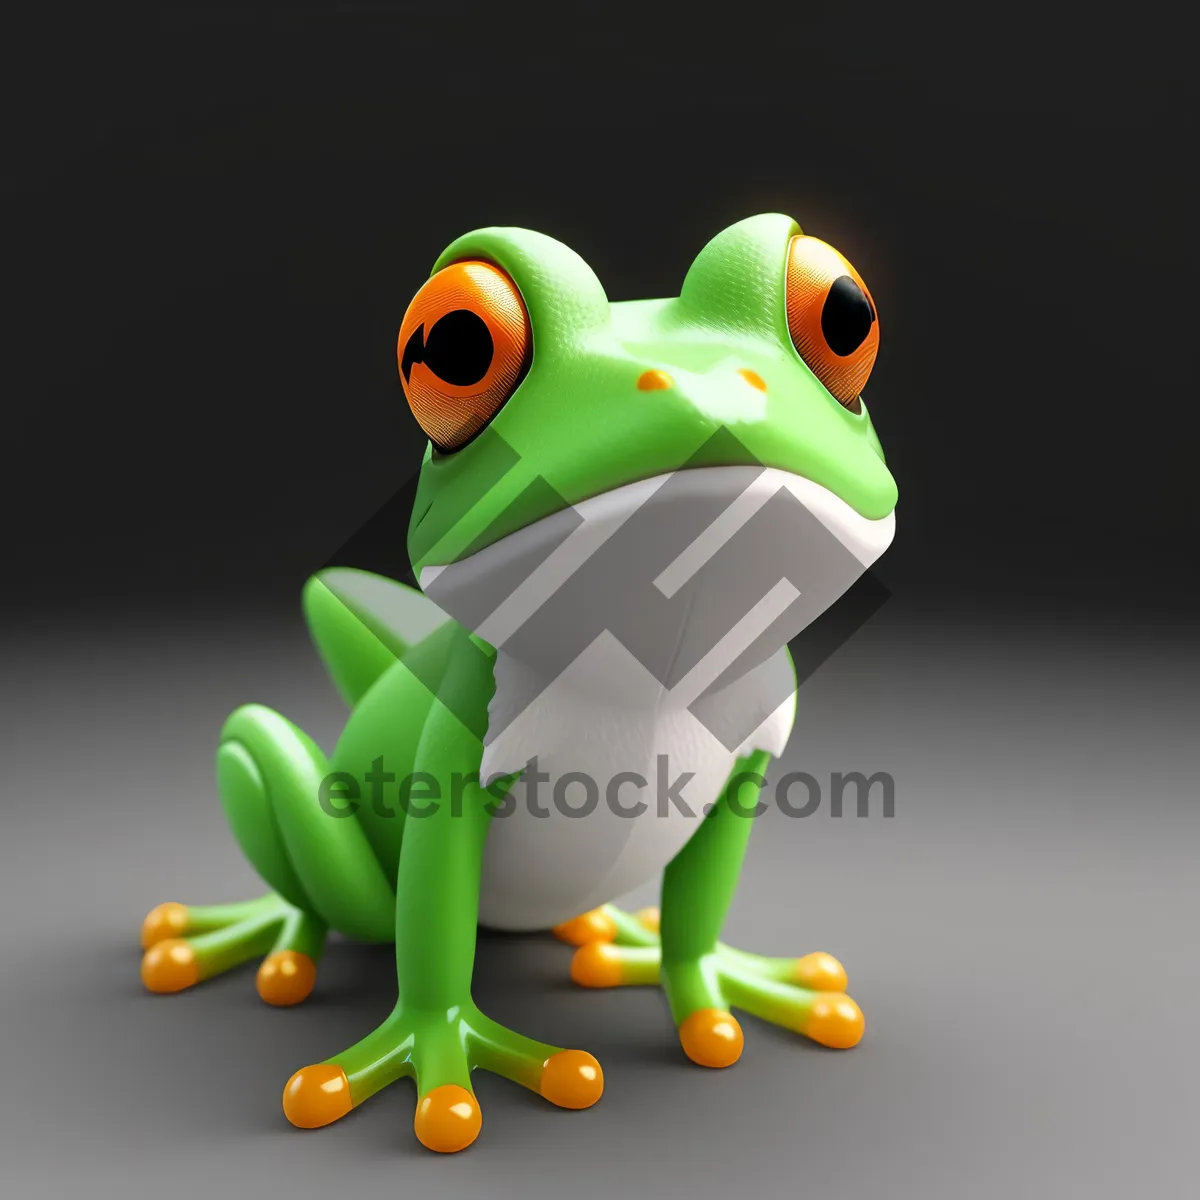 Picture of Cute Cartoon Frog with Big Expressive Eyes